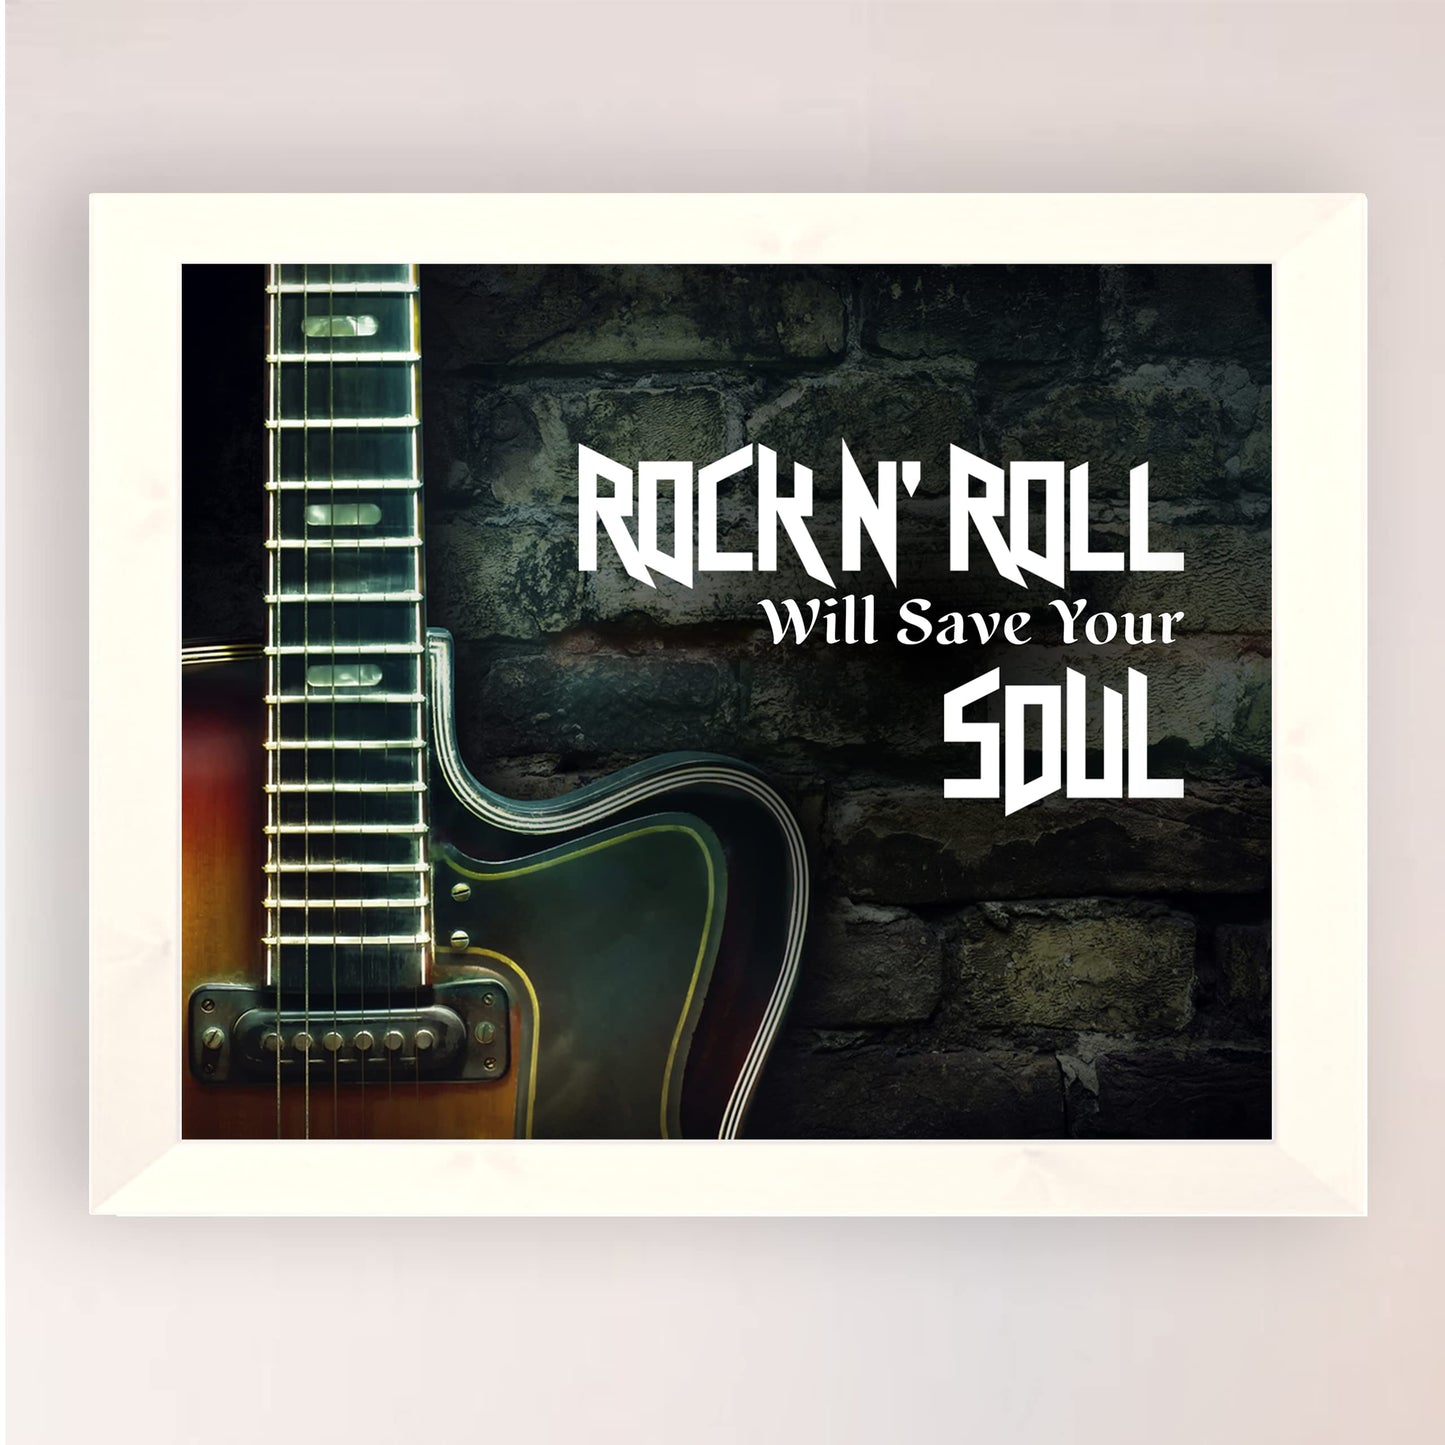 Rock N' Roll - Vintage Music Wall Art Poster, This Ready to Frame Retro Guitar Photo Rock Music Wall Art Print Good For Home, Studio, Rock Band Decor, And Man Cave Room Decor, Unframed - 8x10"